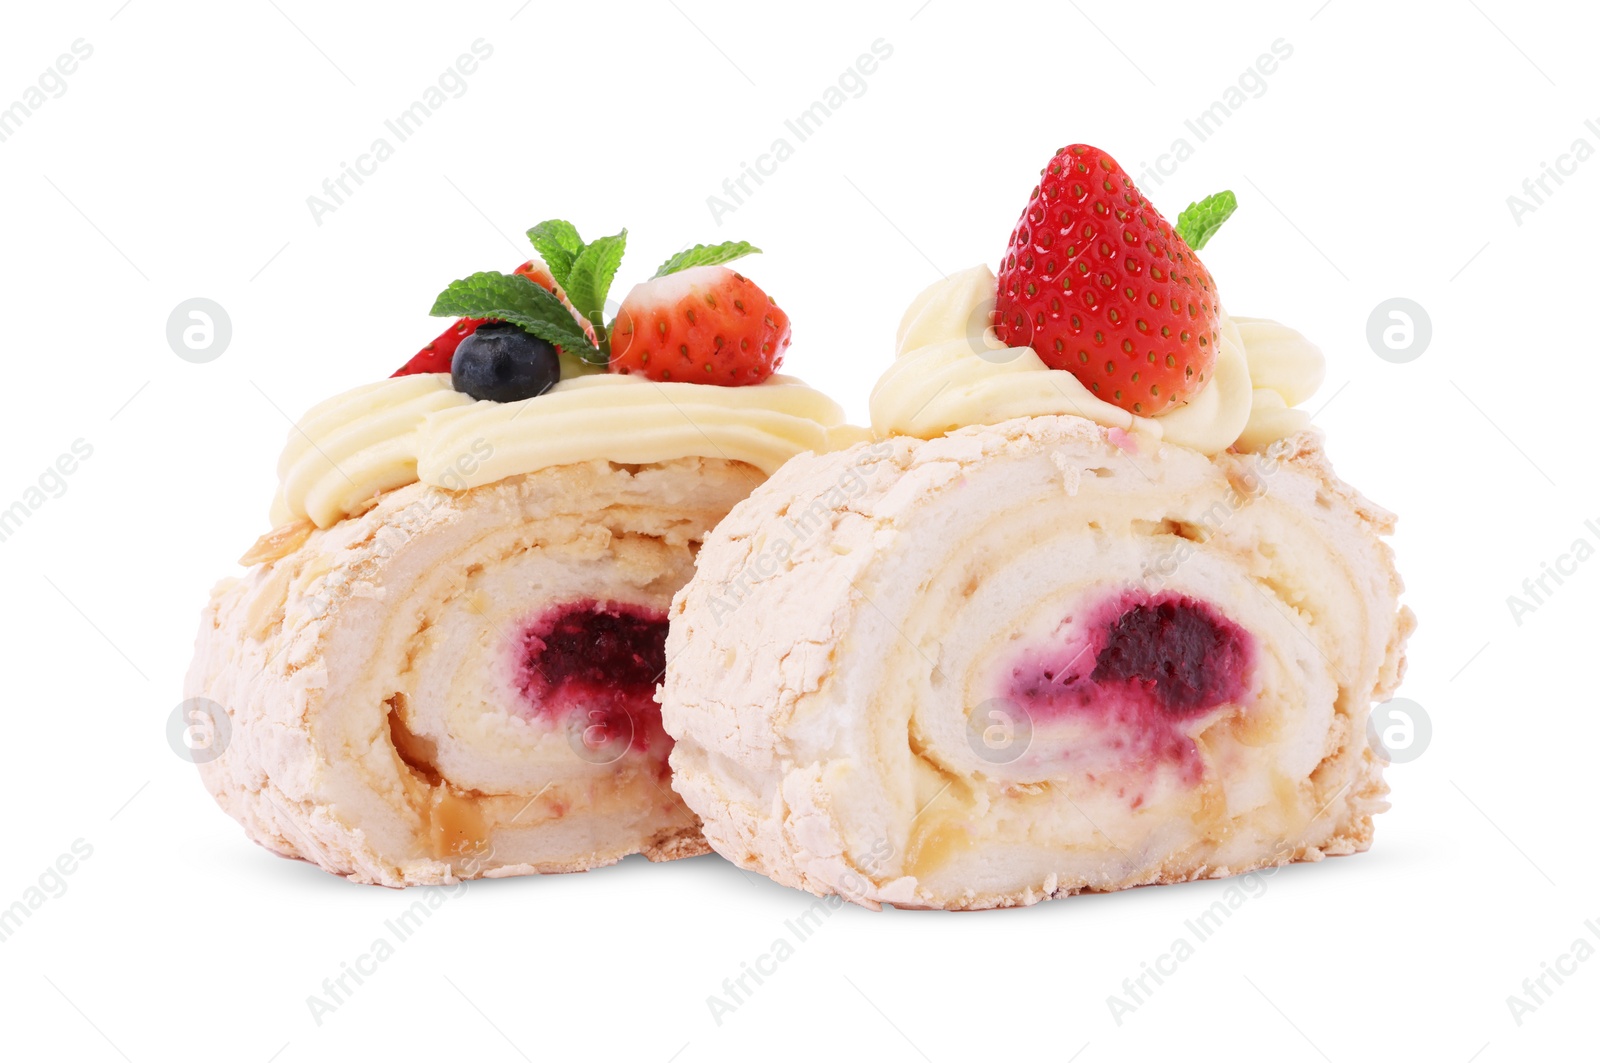 Photo of Slices of tasty meringue roll with jam, berries and mint leaves isolated on white